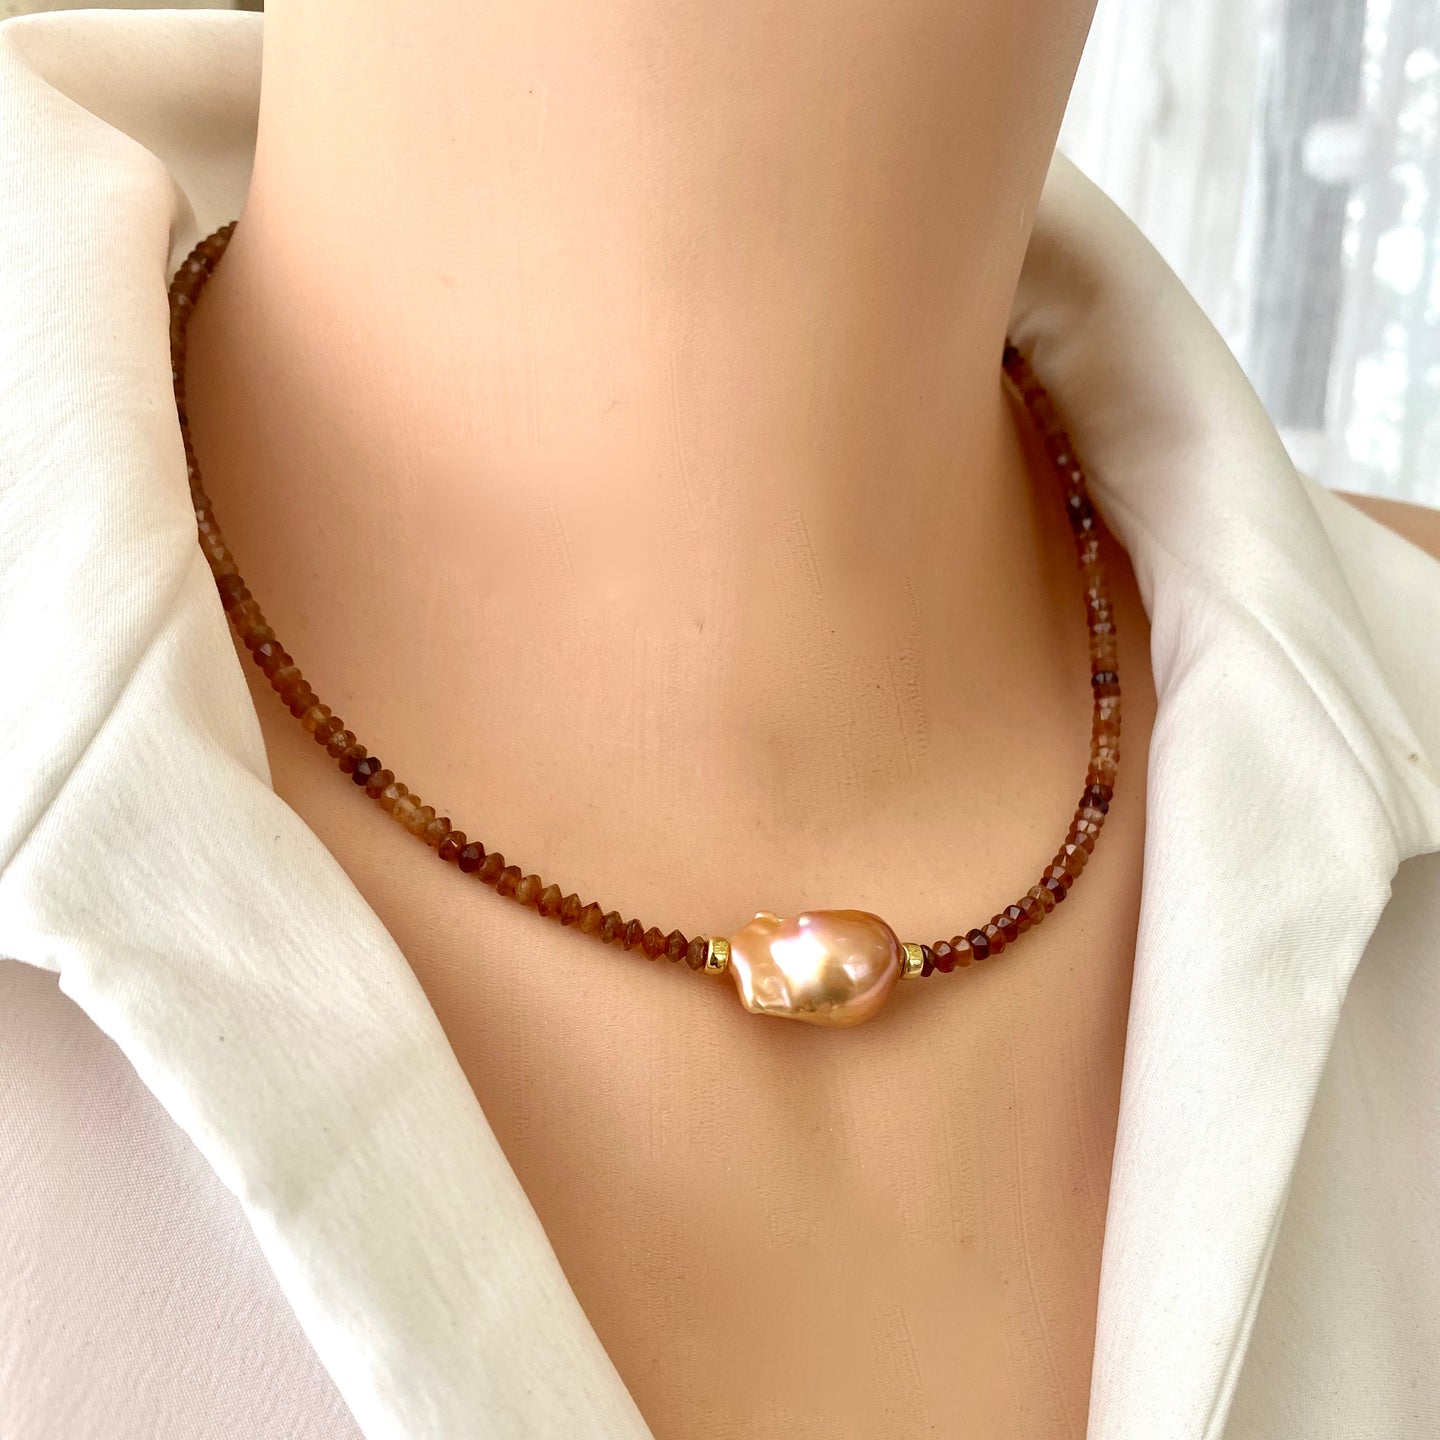 Hessonite Garnet Beaded Necklace with Golden Pink Baroque Pearl in Middle. Gold Vermeil, 17